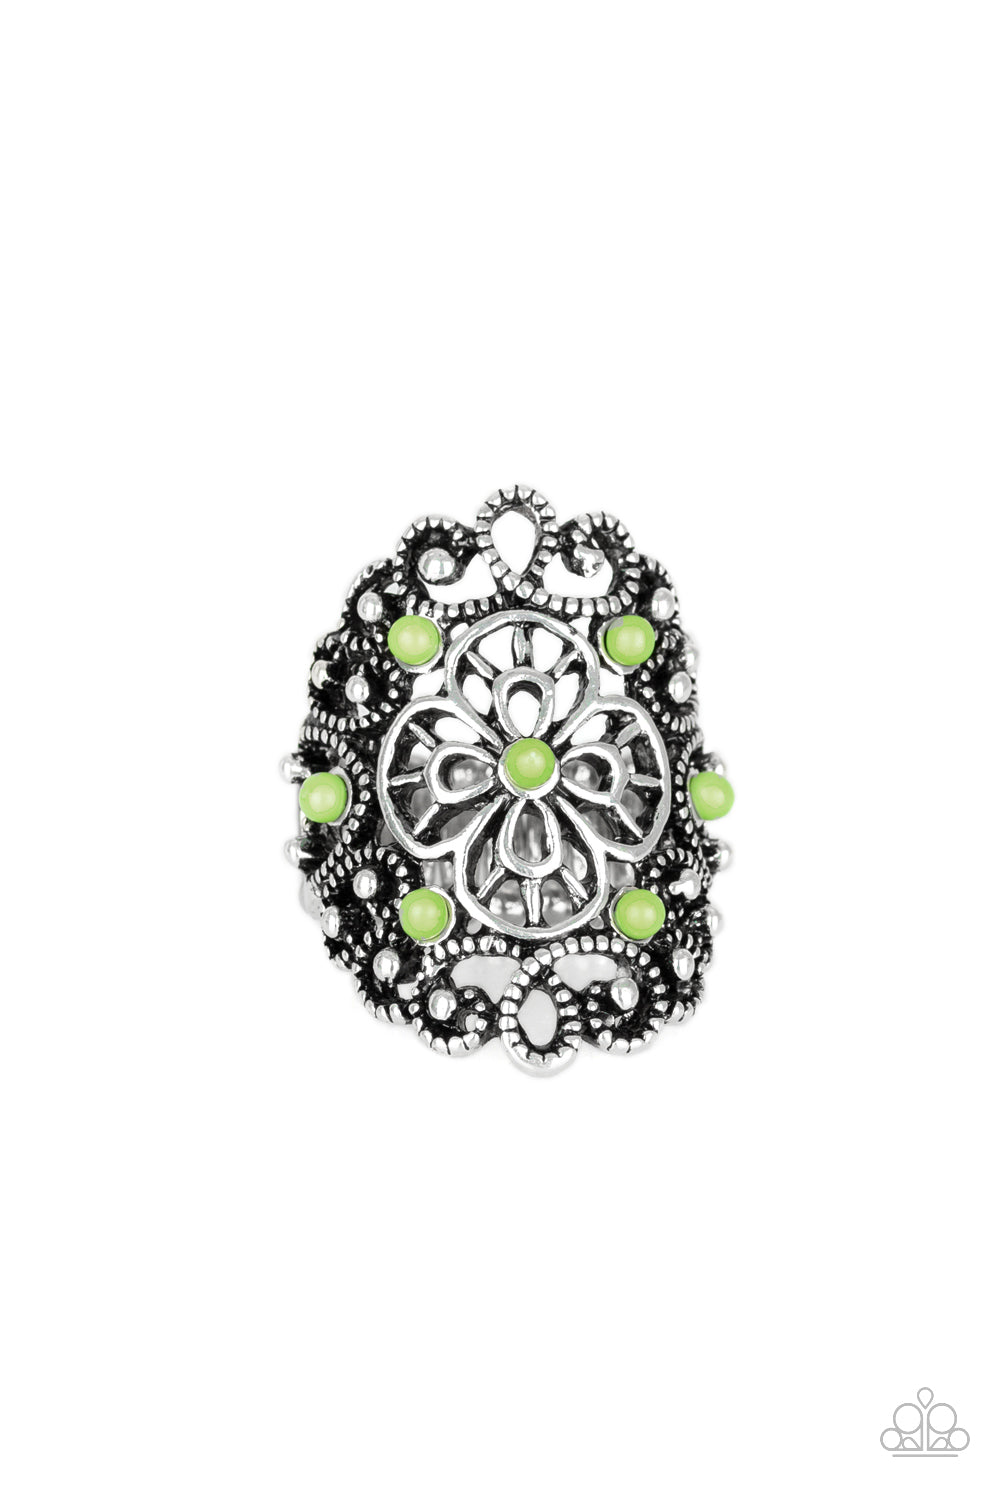 Floral Fancies - Green and Silver Ring - Paparazzi Accessories - Dainty green beads are sprinkled across a shimmery frame swirling with silver filigree, creating a whimsical floral frame atop the finger. Features a stretchy band for a flexible fit. Sold as one individual stylish fashion ring.